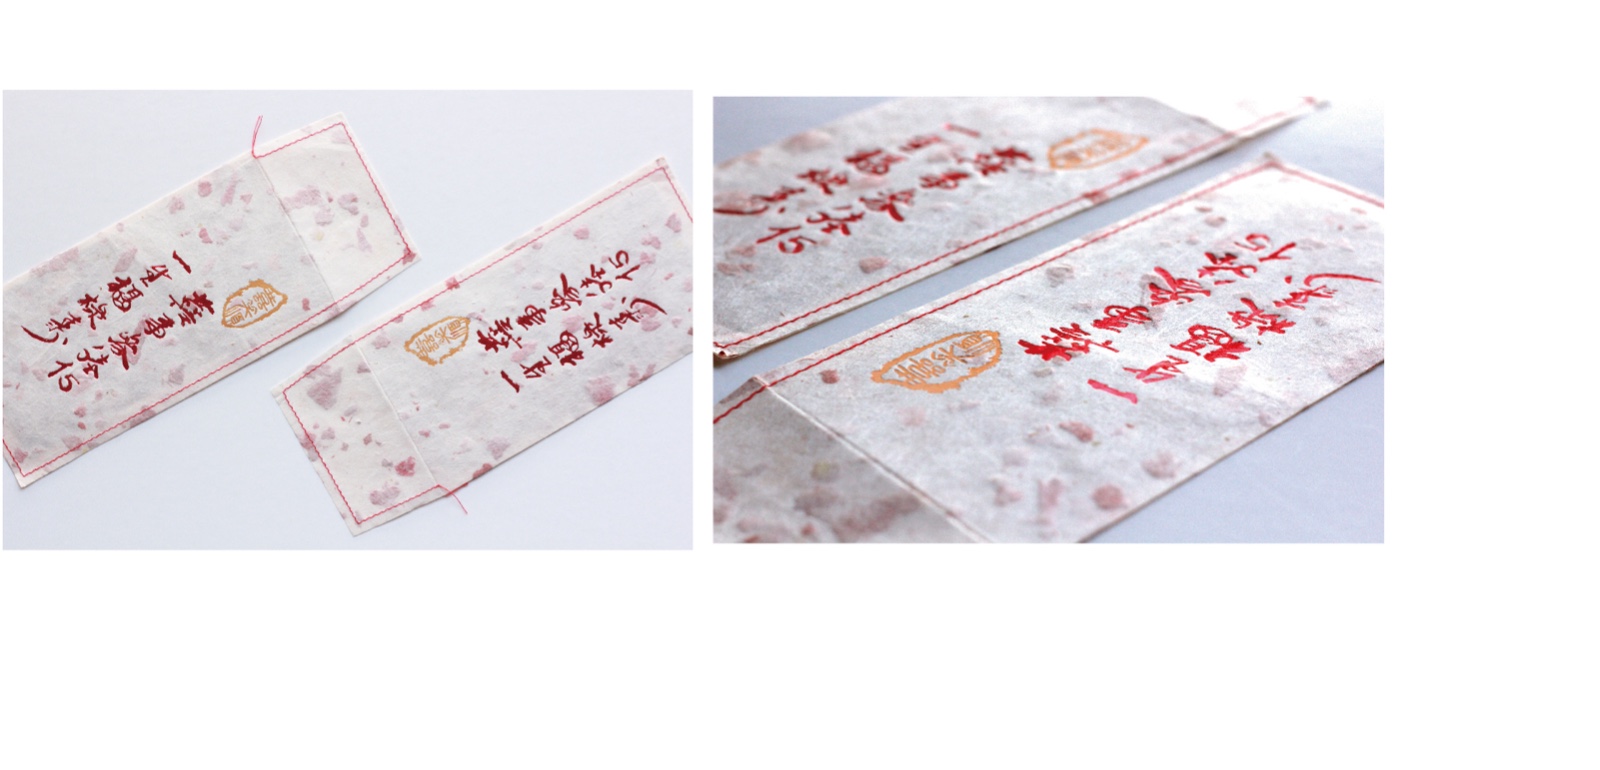 In order to allow more people to understand Taiwanese customs, as well as integrate the trend of environmental protection, young artists in New Taipei City applied their creativity and recycled disposed firecracker scraps to make them into blessing sachets.  | Taipei Cultural experience | CAN Culture